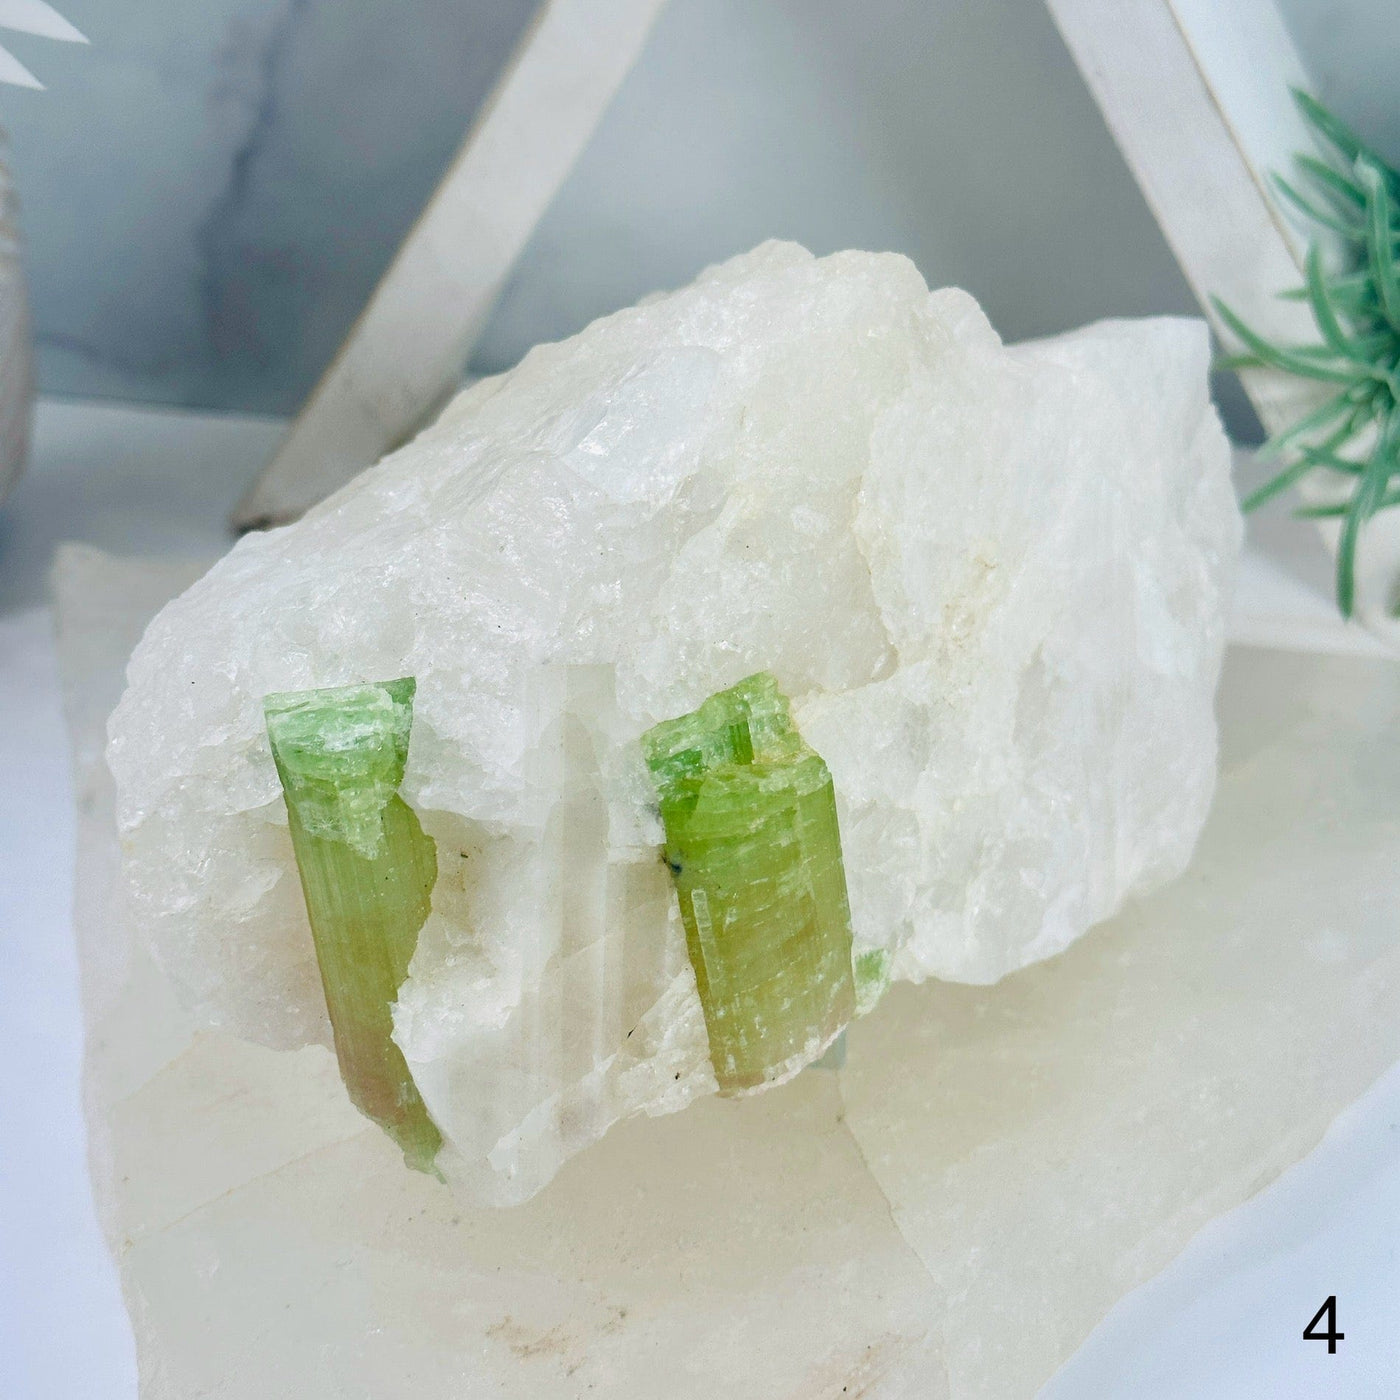 Watermelon Tourmaline Crystals in Matrix - You Choose variant 4 labeled